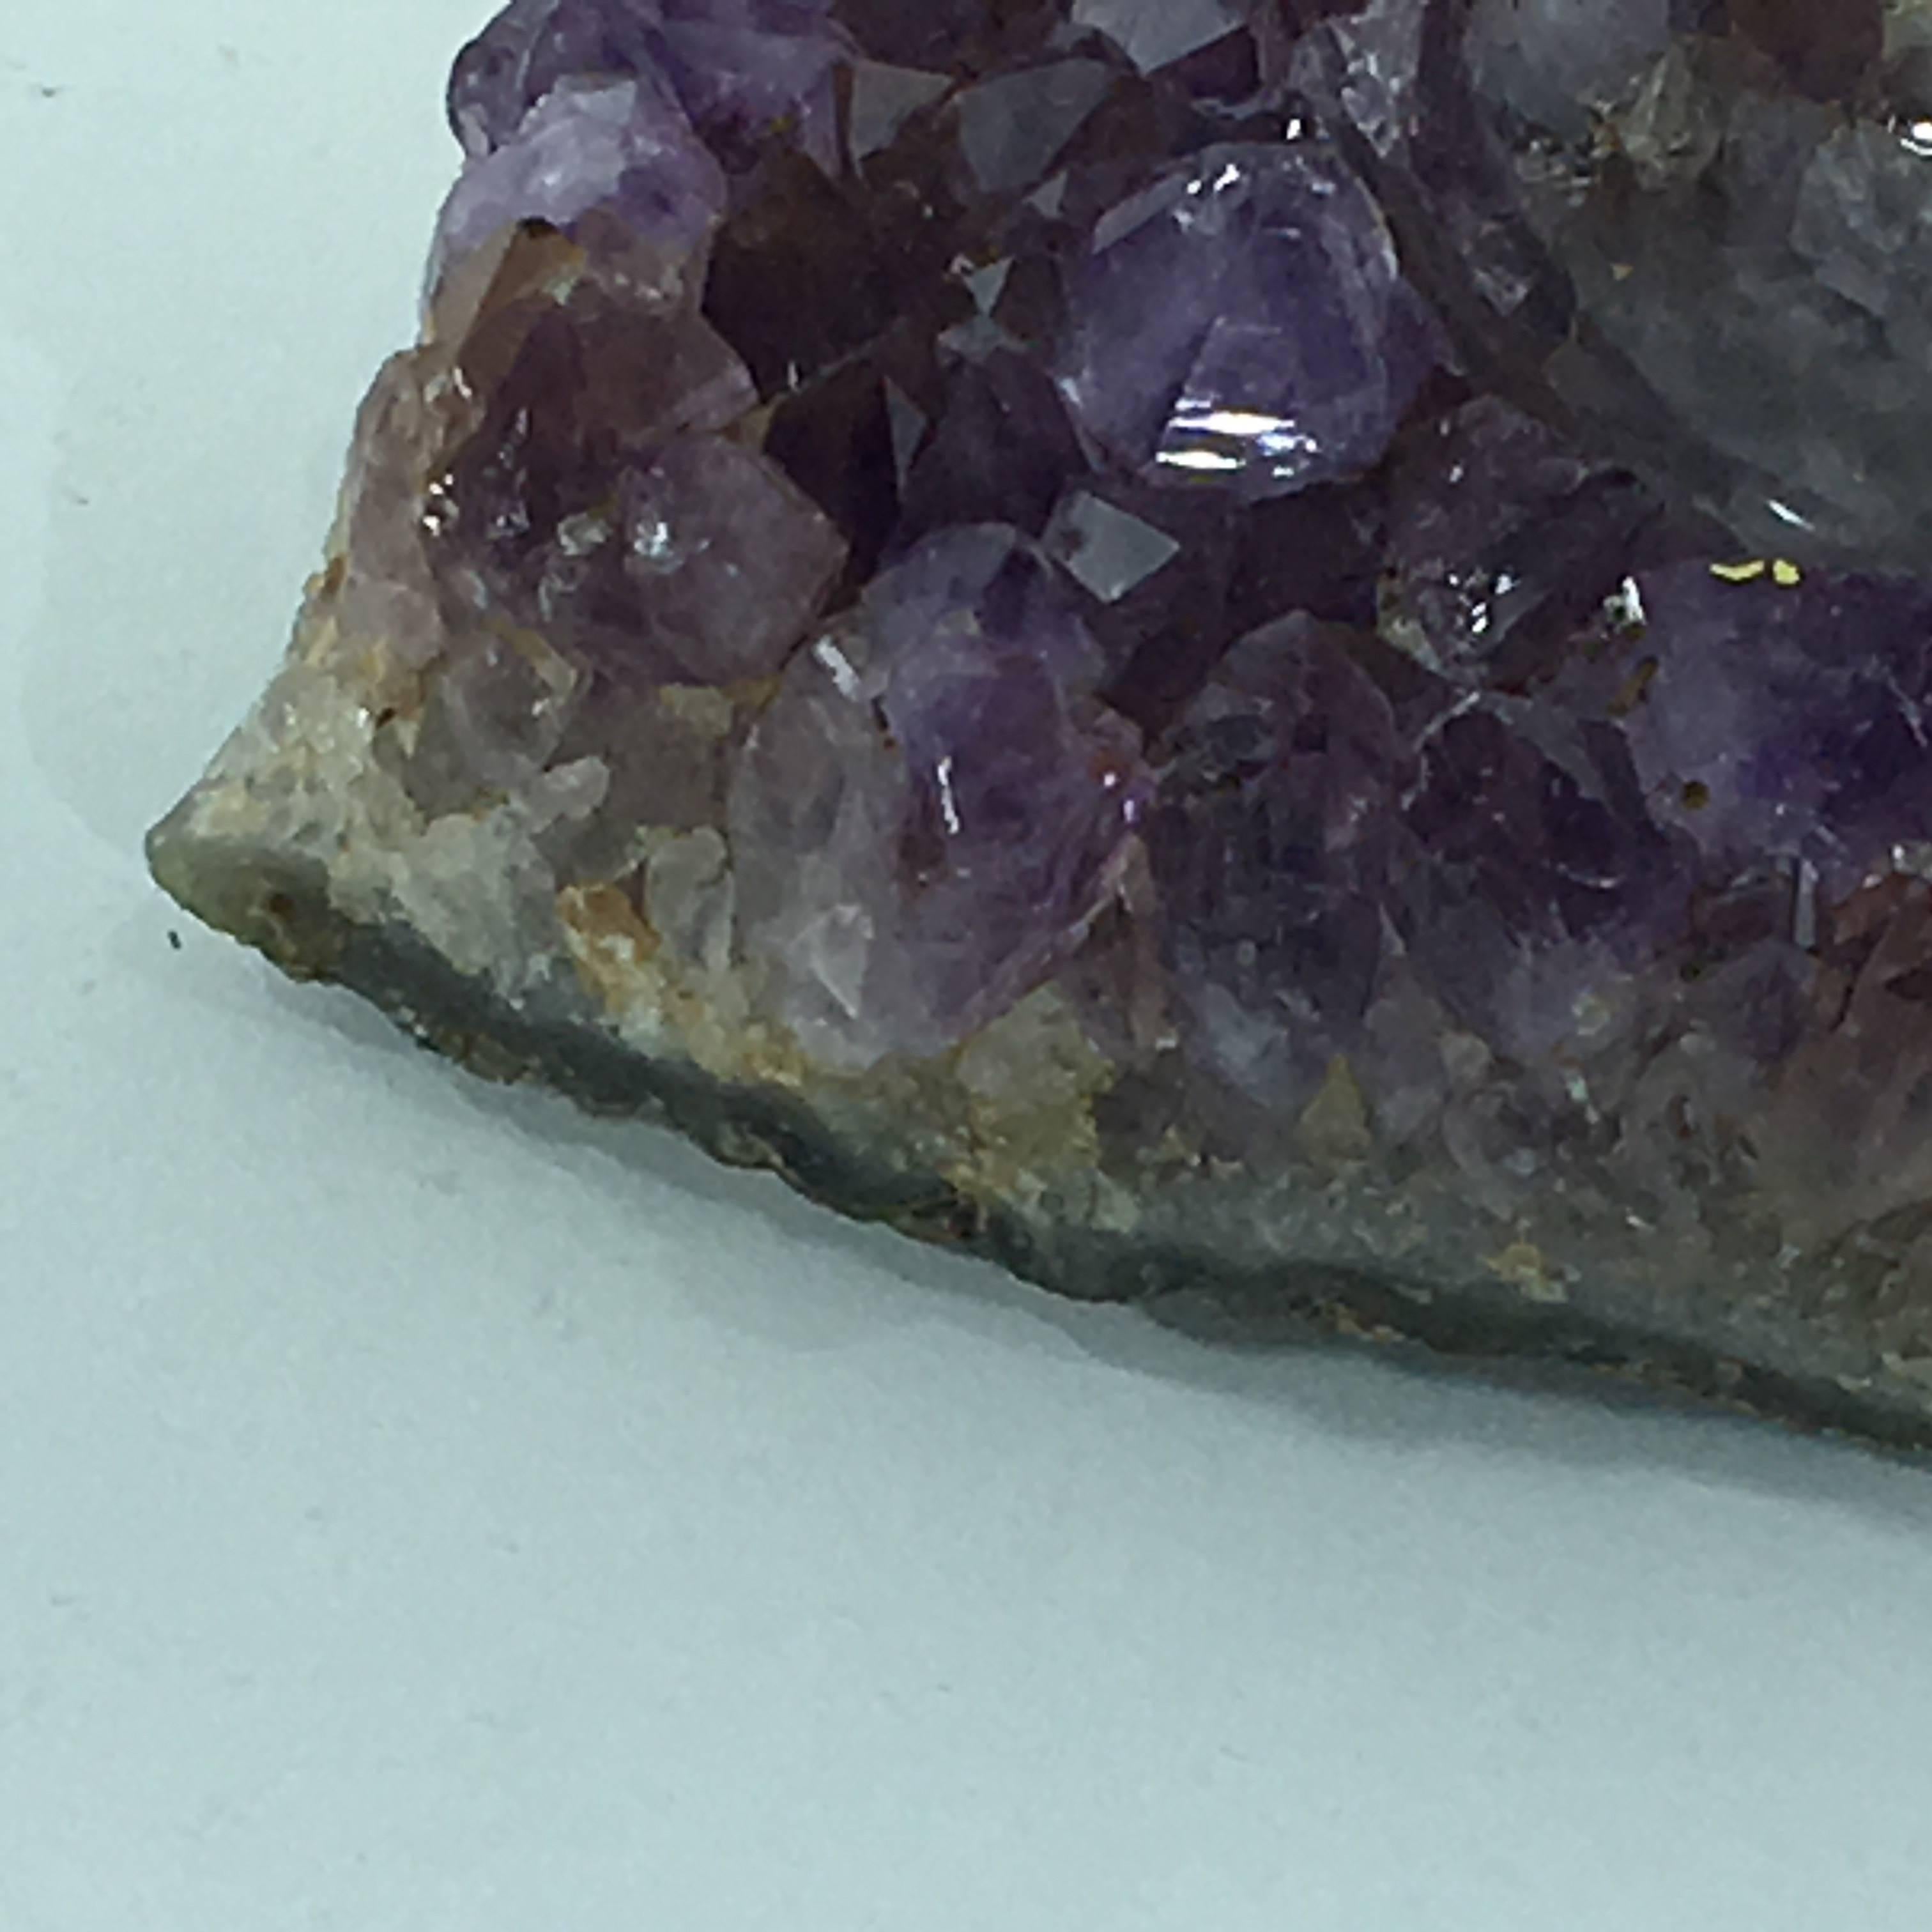 Zimbabwean Midcentury Amethyst Ashtray from Zambie with Medium Size and Purple Color